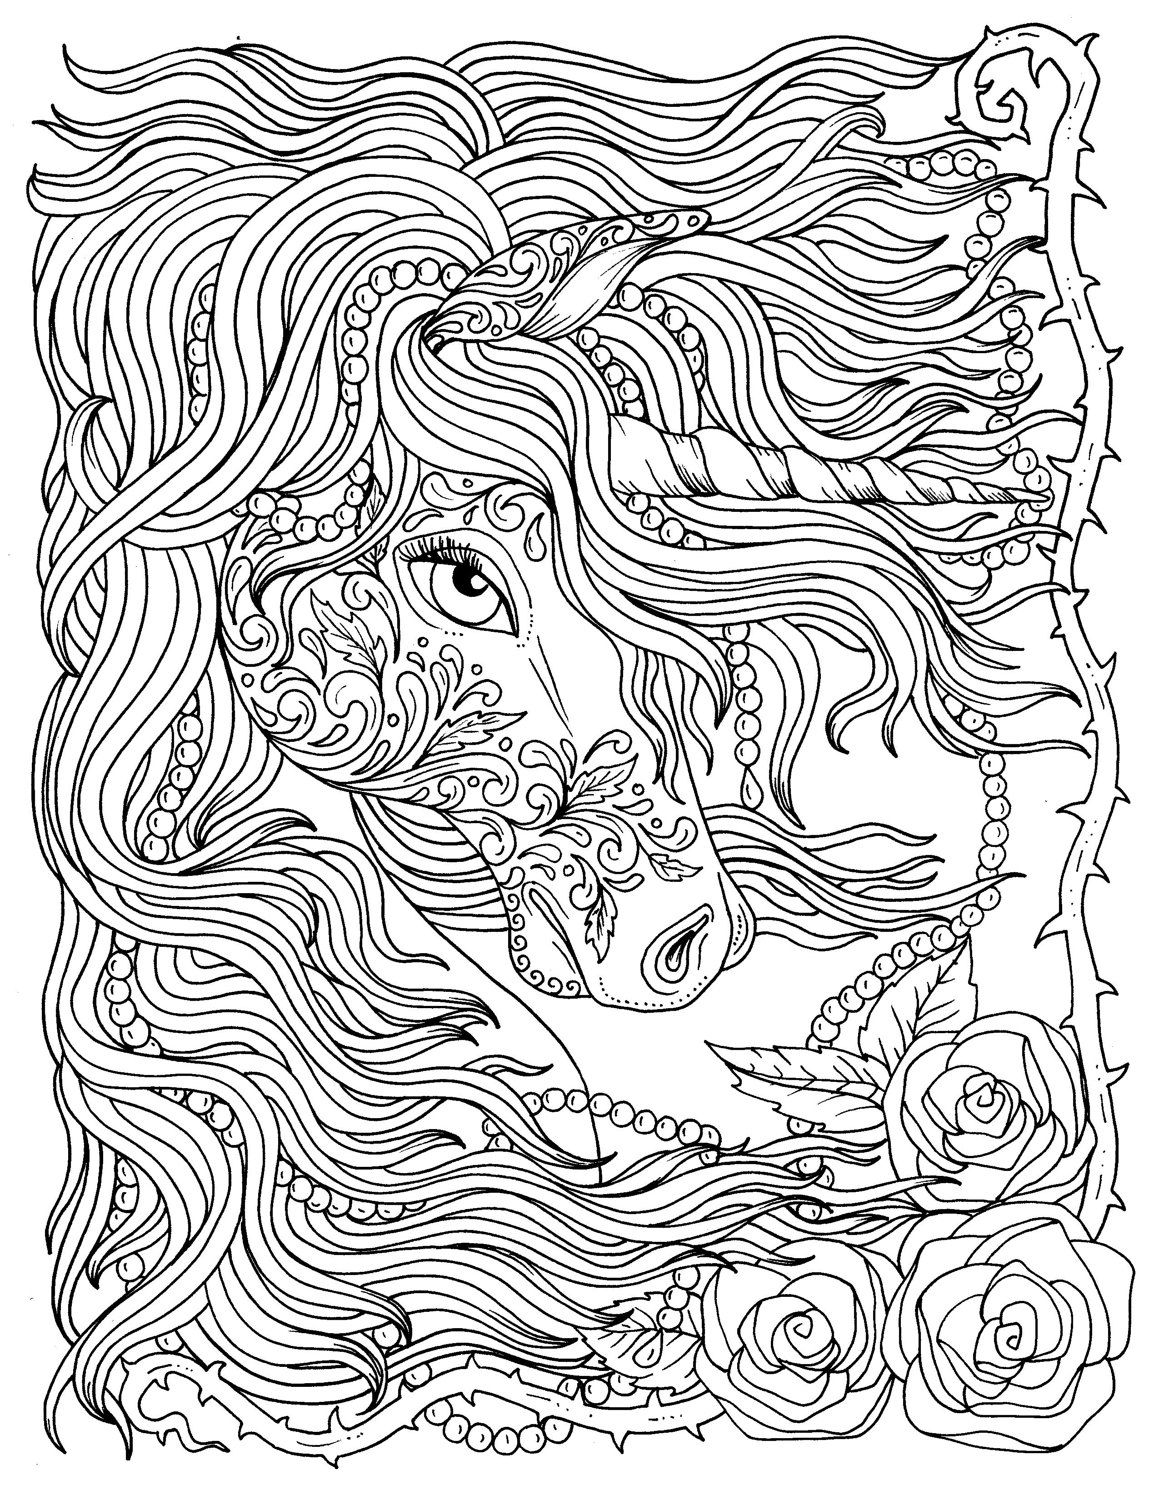 Great Photo of Unicorn Coloring Pages For Adults ...